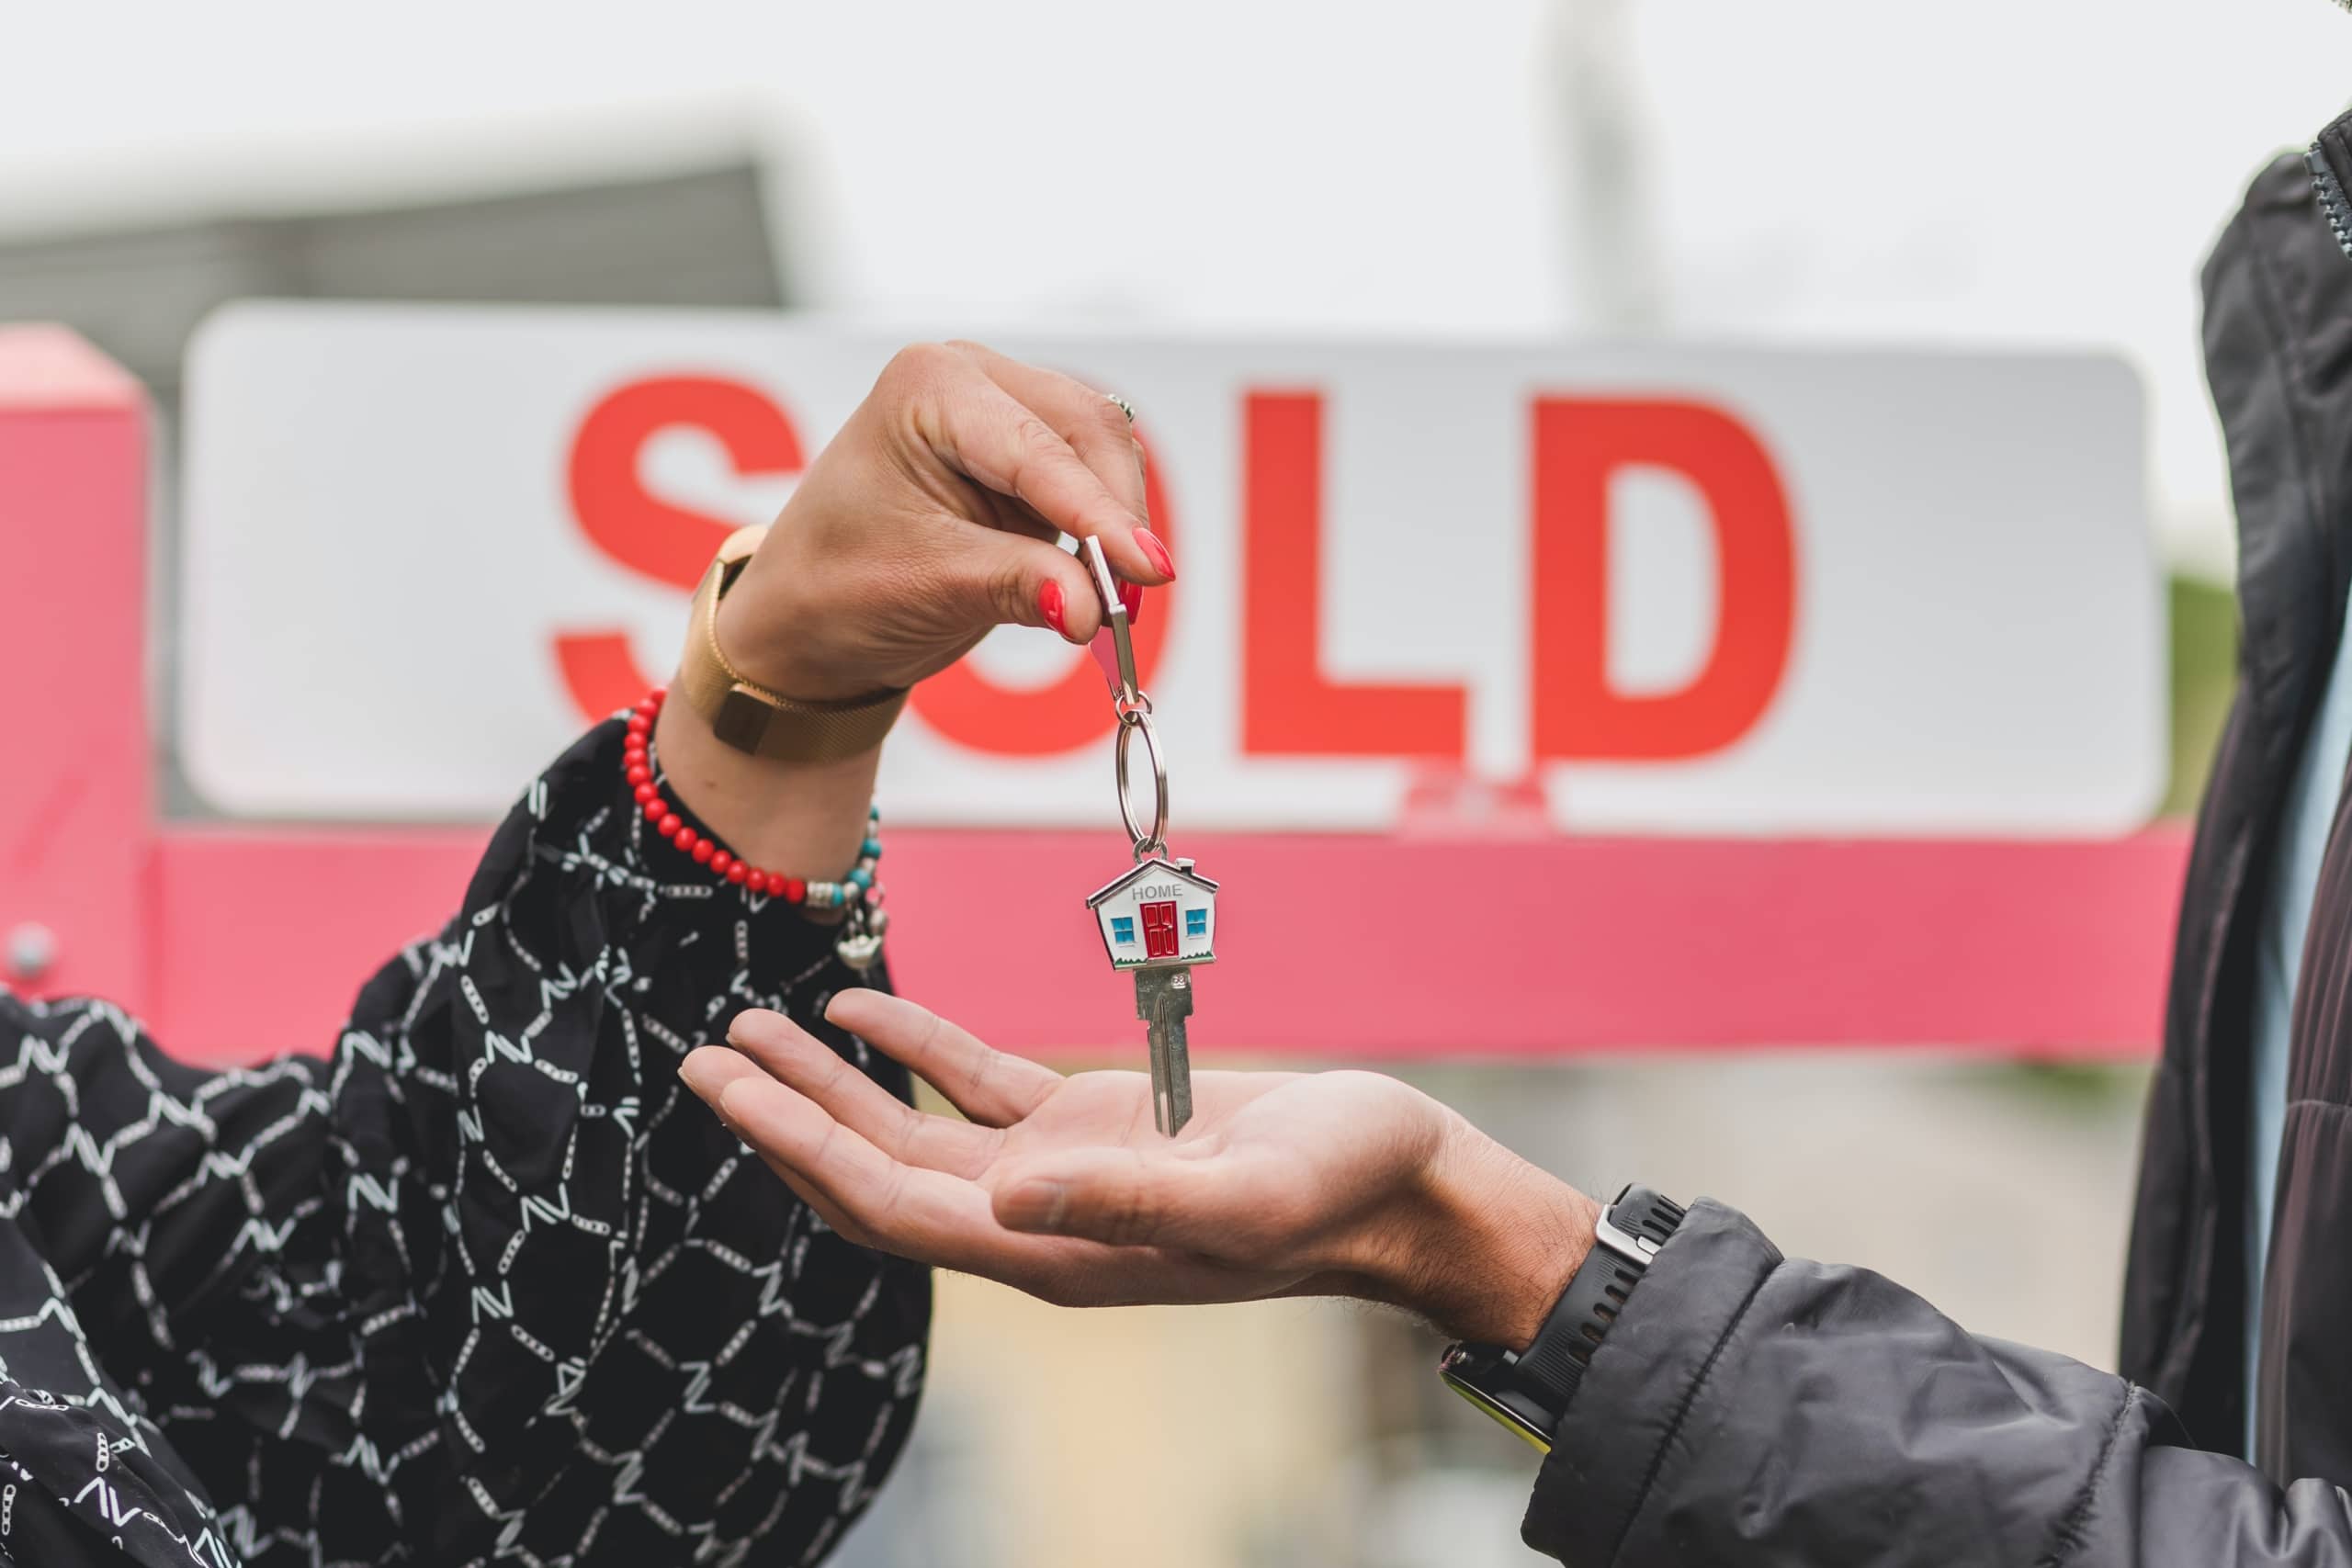 Prepared to Sell Your House on the Market? The Following Are 11 Things That Most People Forget to Do